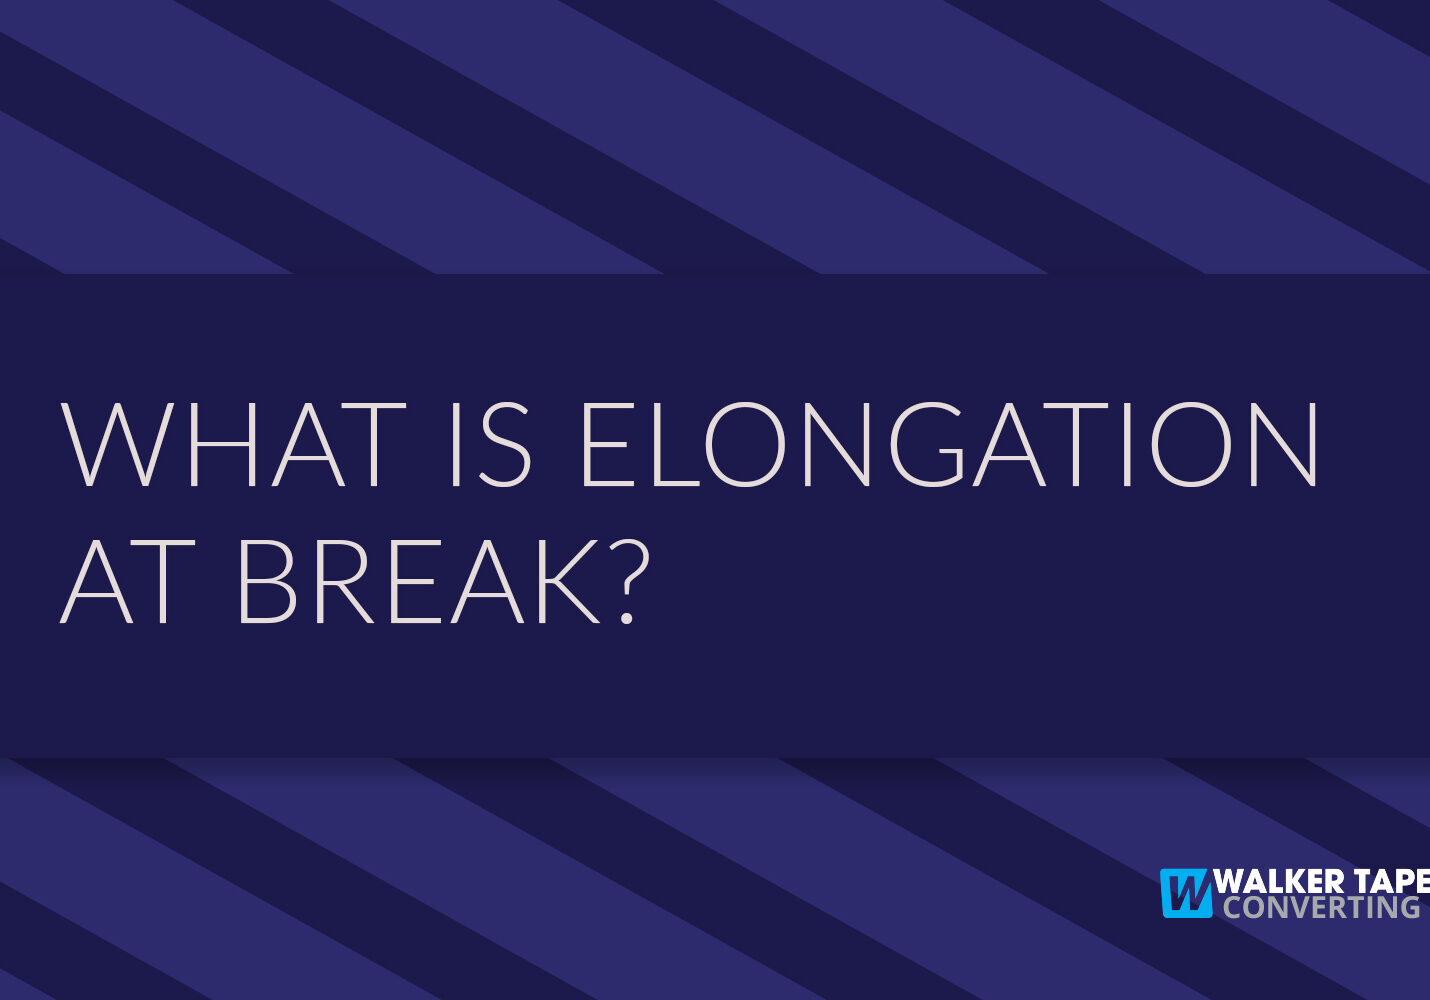 What is Elongation